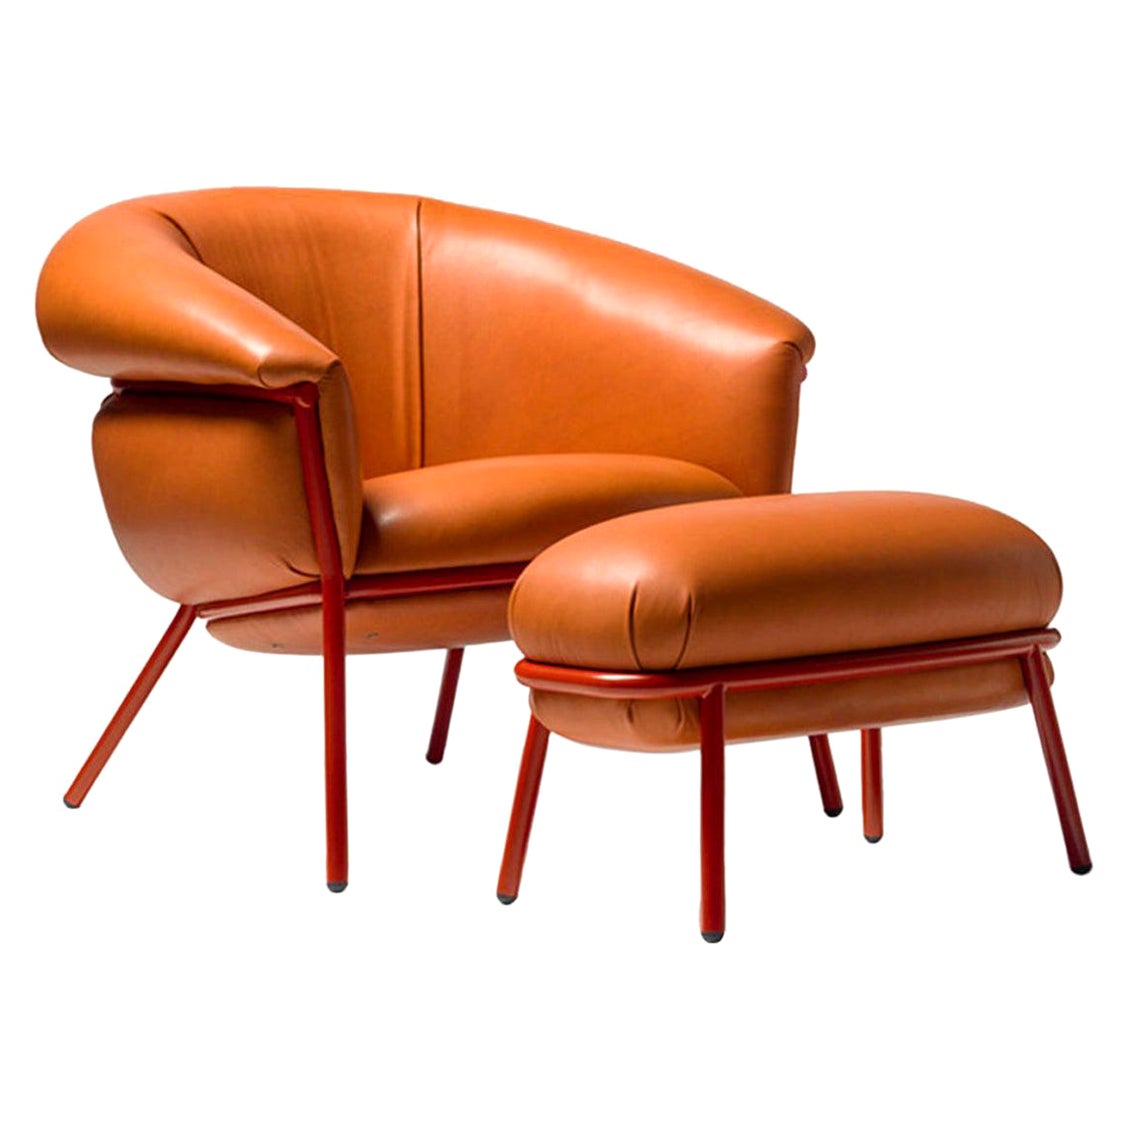 Stephen Burks Contemporary Grasso Orange Leather Armchair and Foot Stool For Sale